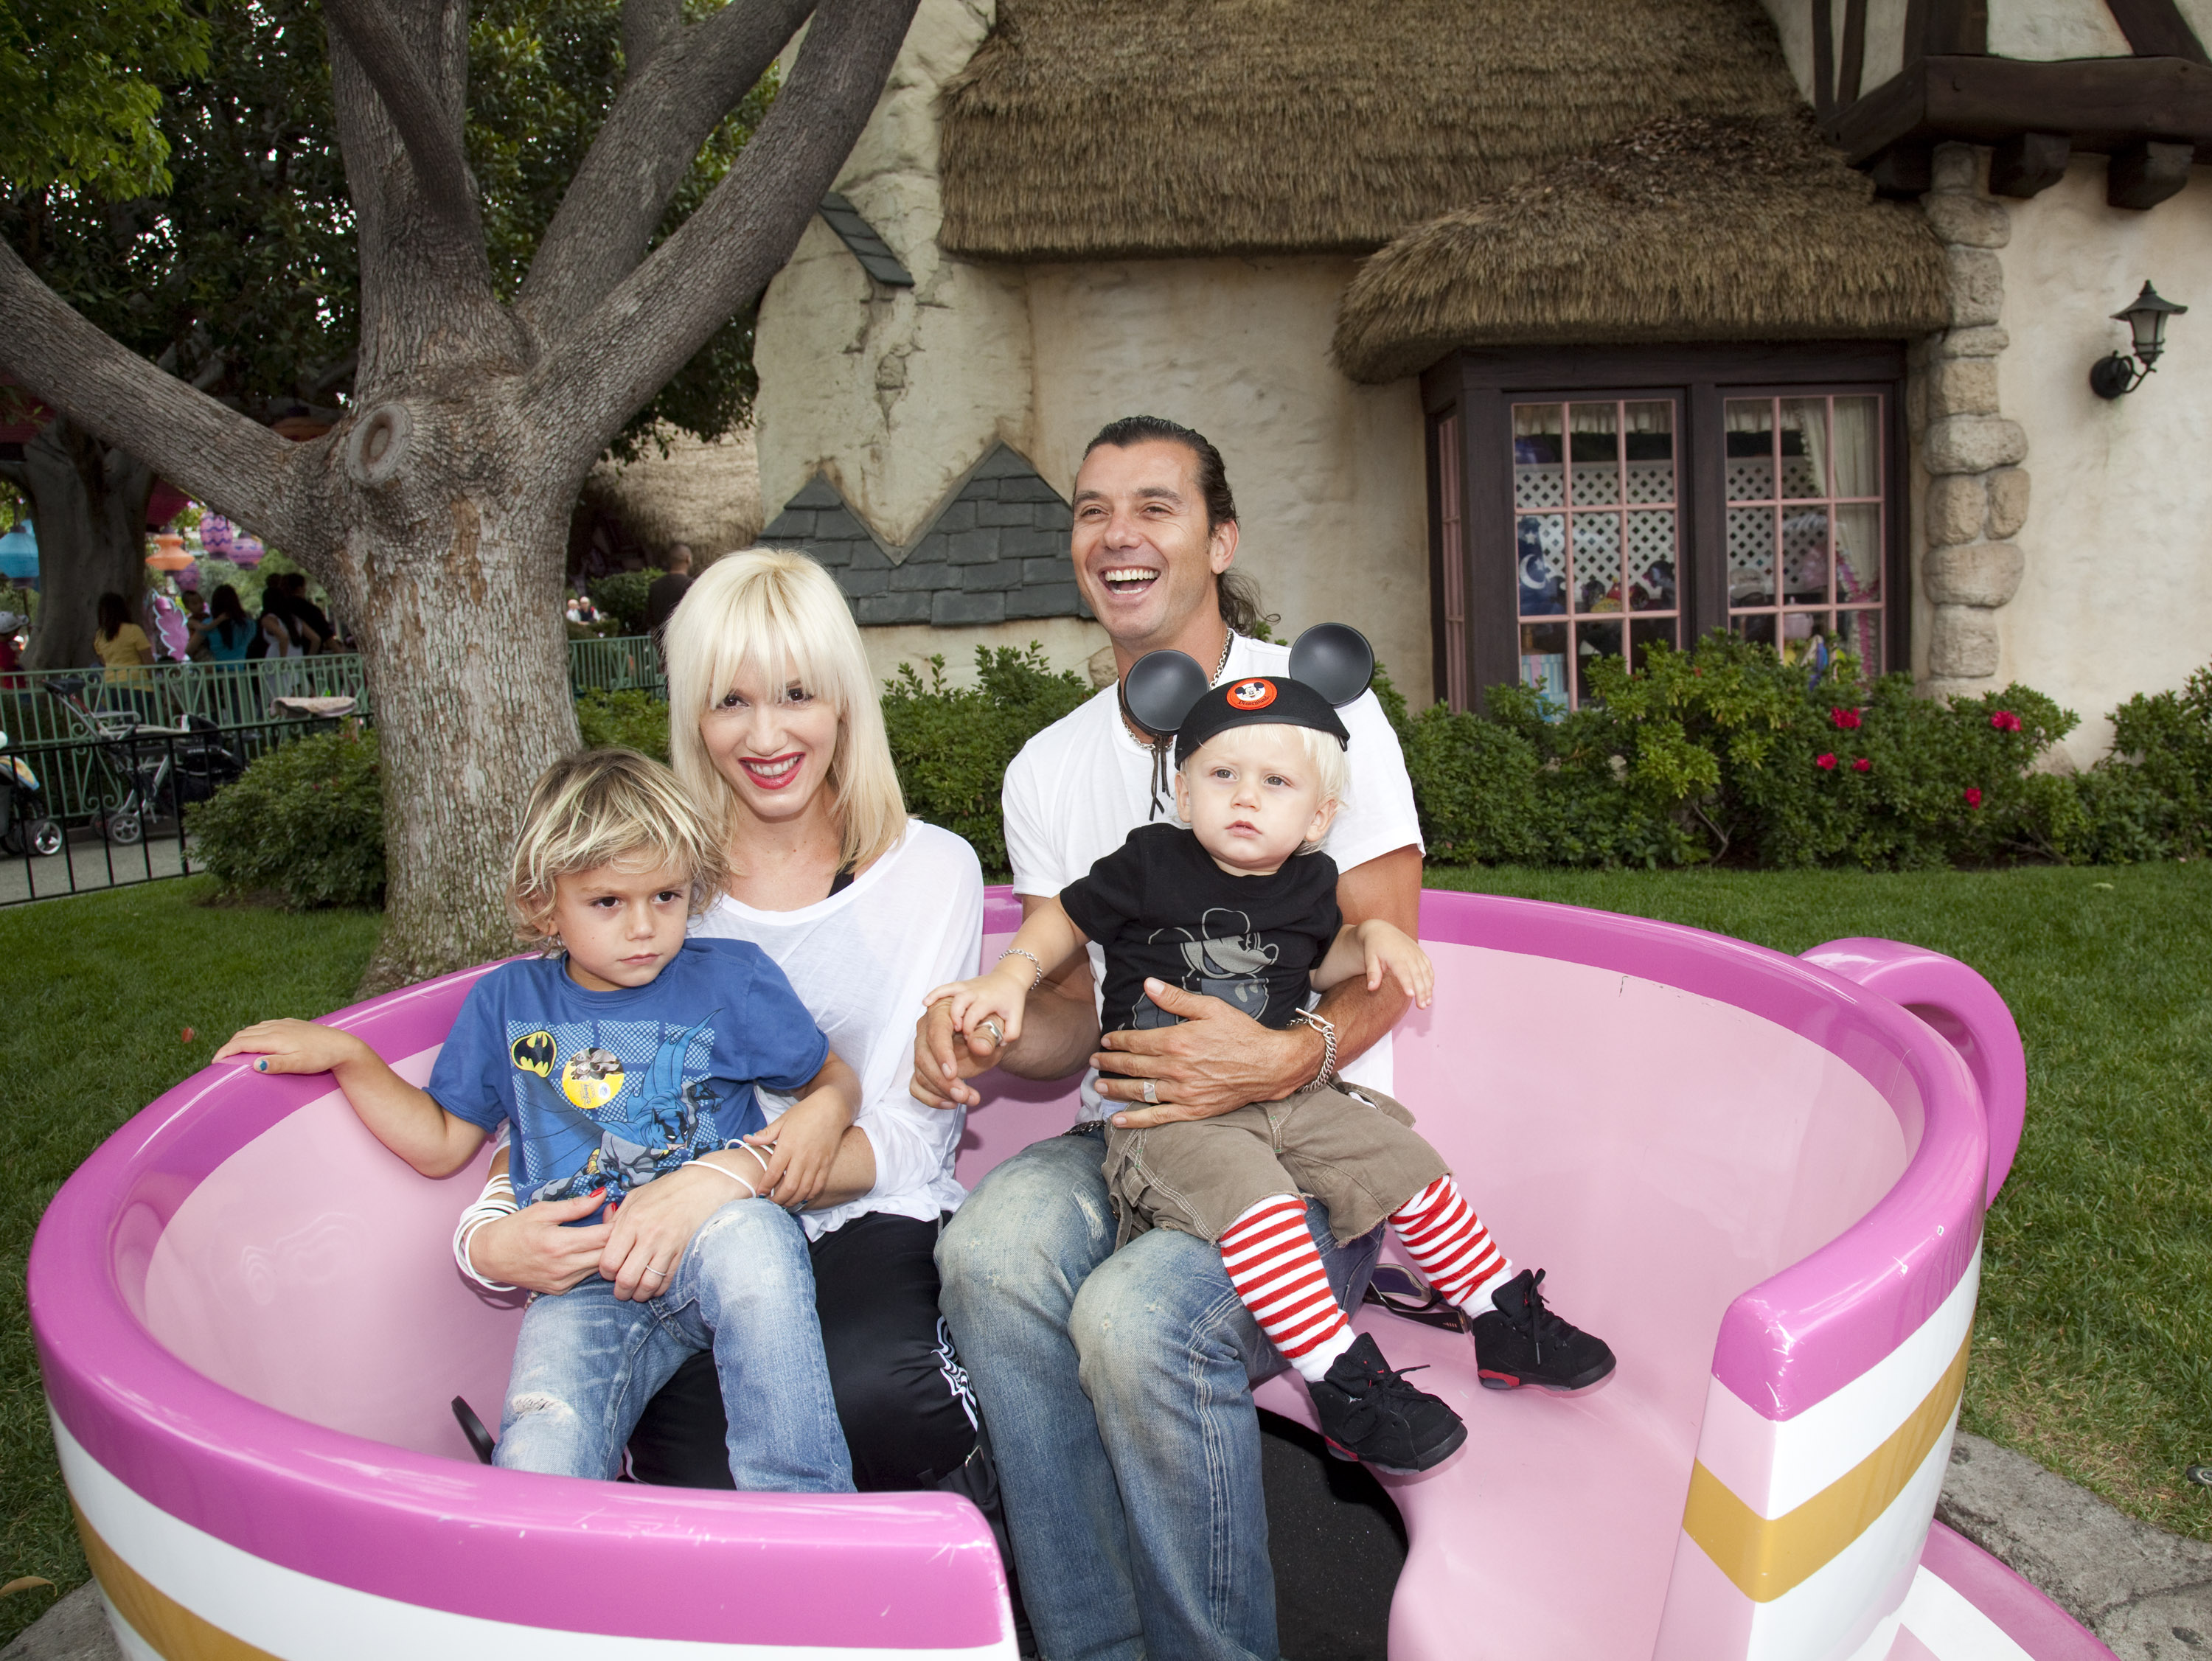 Gavin Rossdale and Gwen Stefani with their kids, 2010 | Source: Getty Images